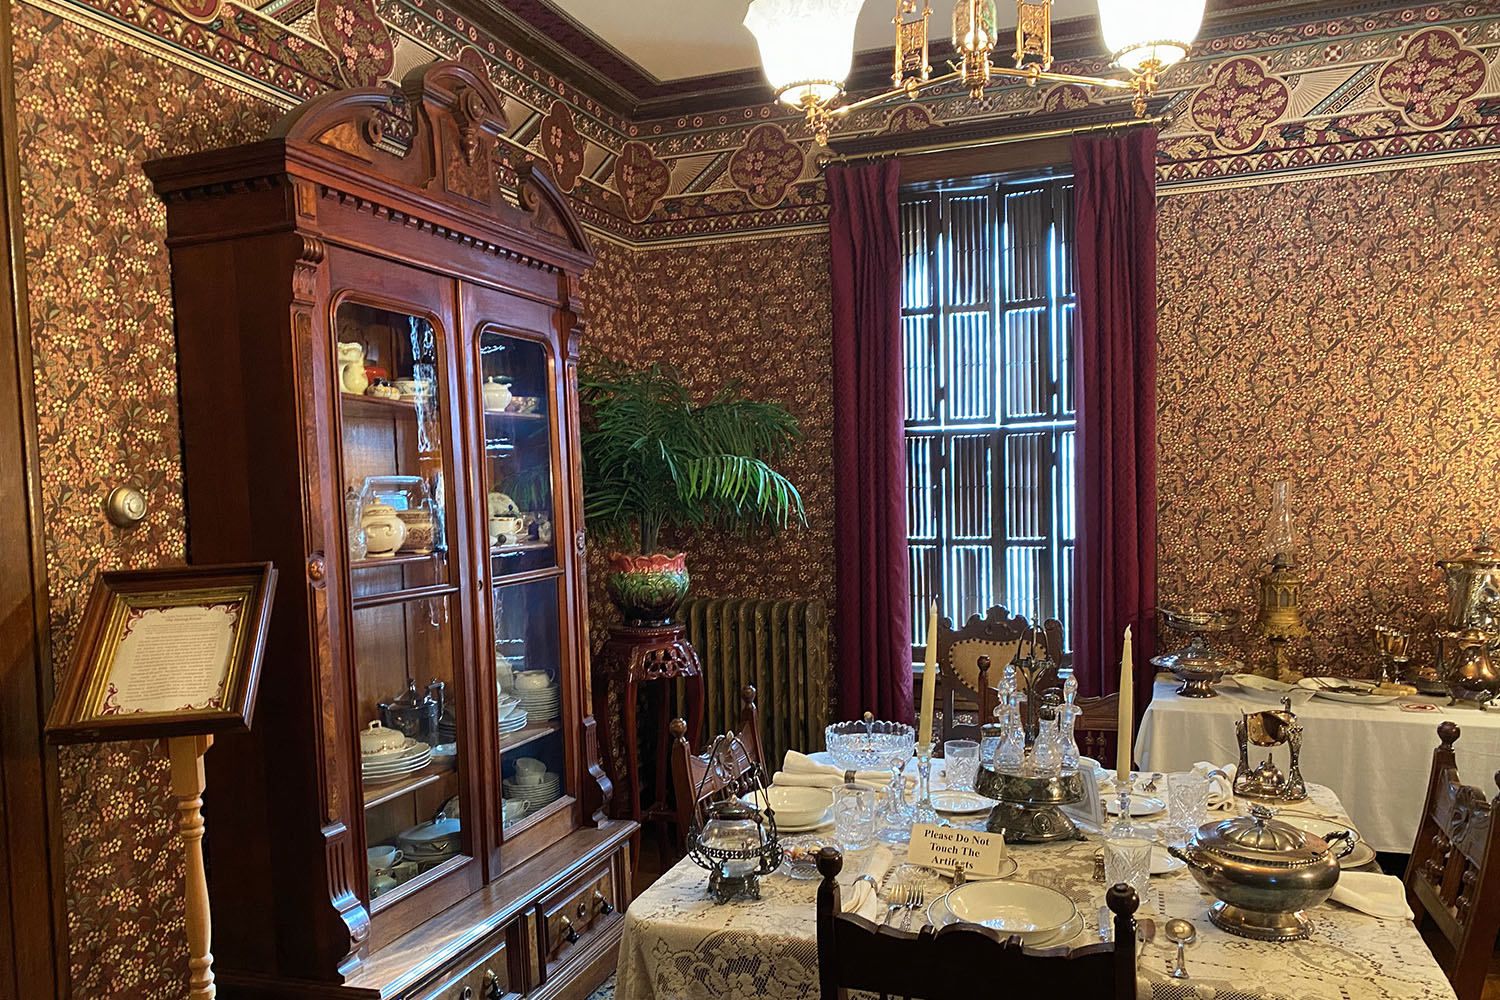 Ornate dining room display at the Victorian House Museum in Cedar Falls, Iowa